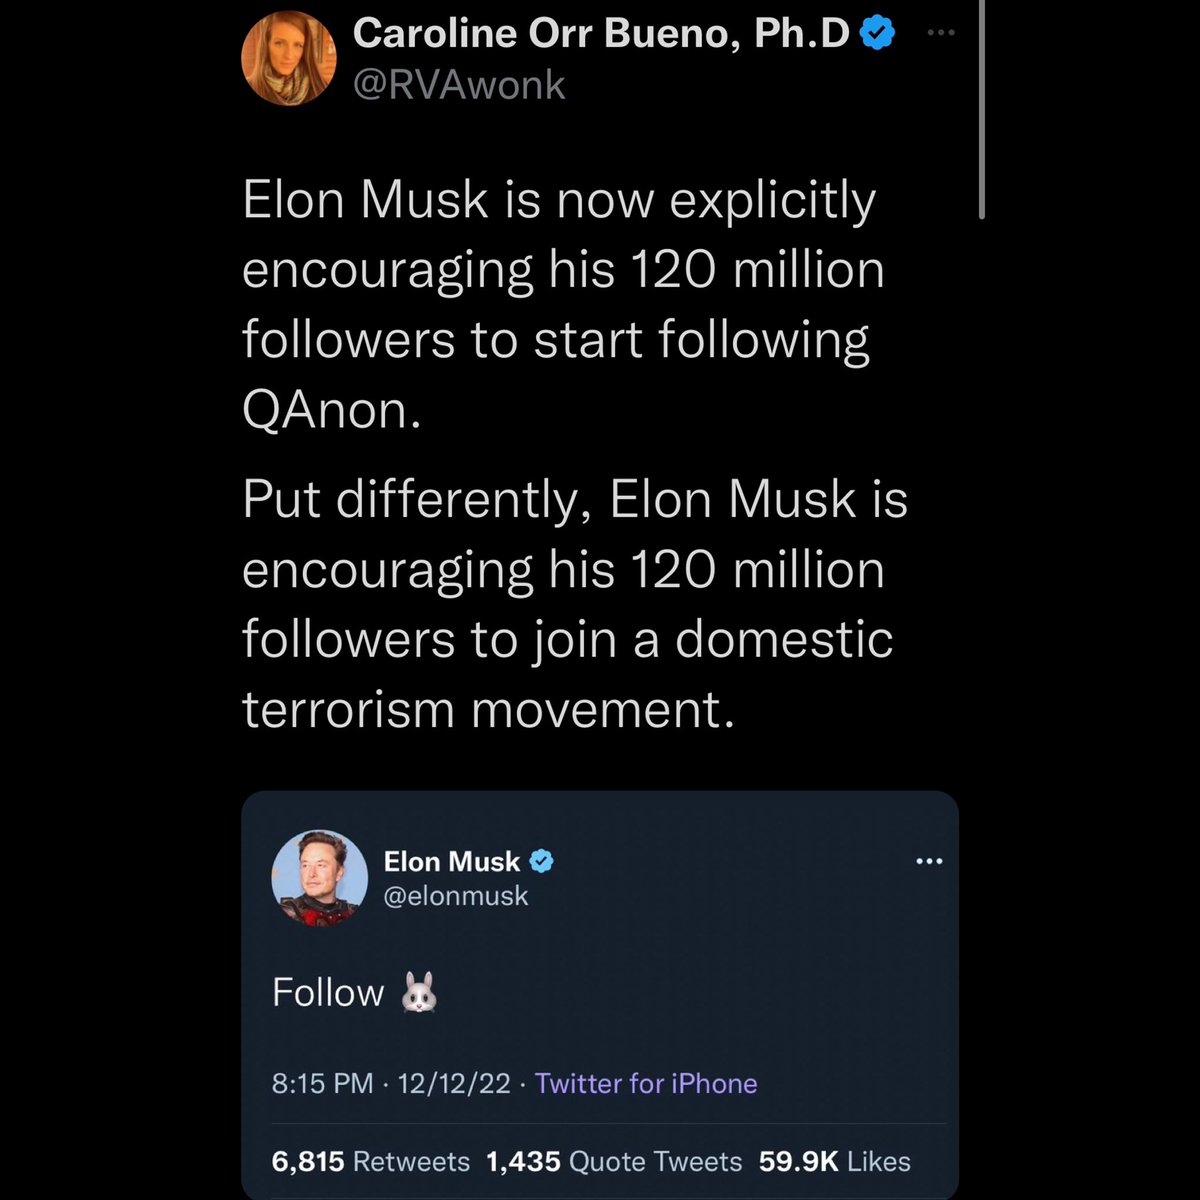 Elon tweets a 🐰 emoji and this broad puts him in the same category as Timothy McVeigh. You can’t reason with people like this.